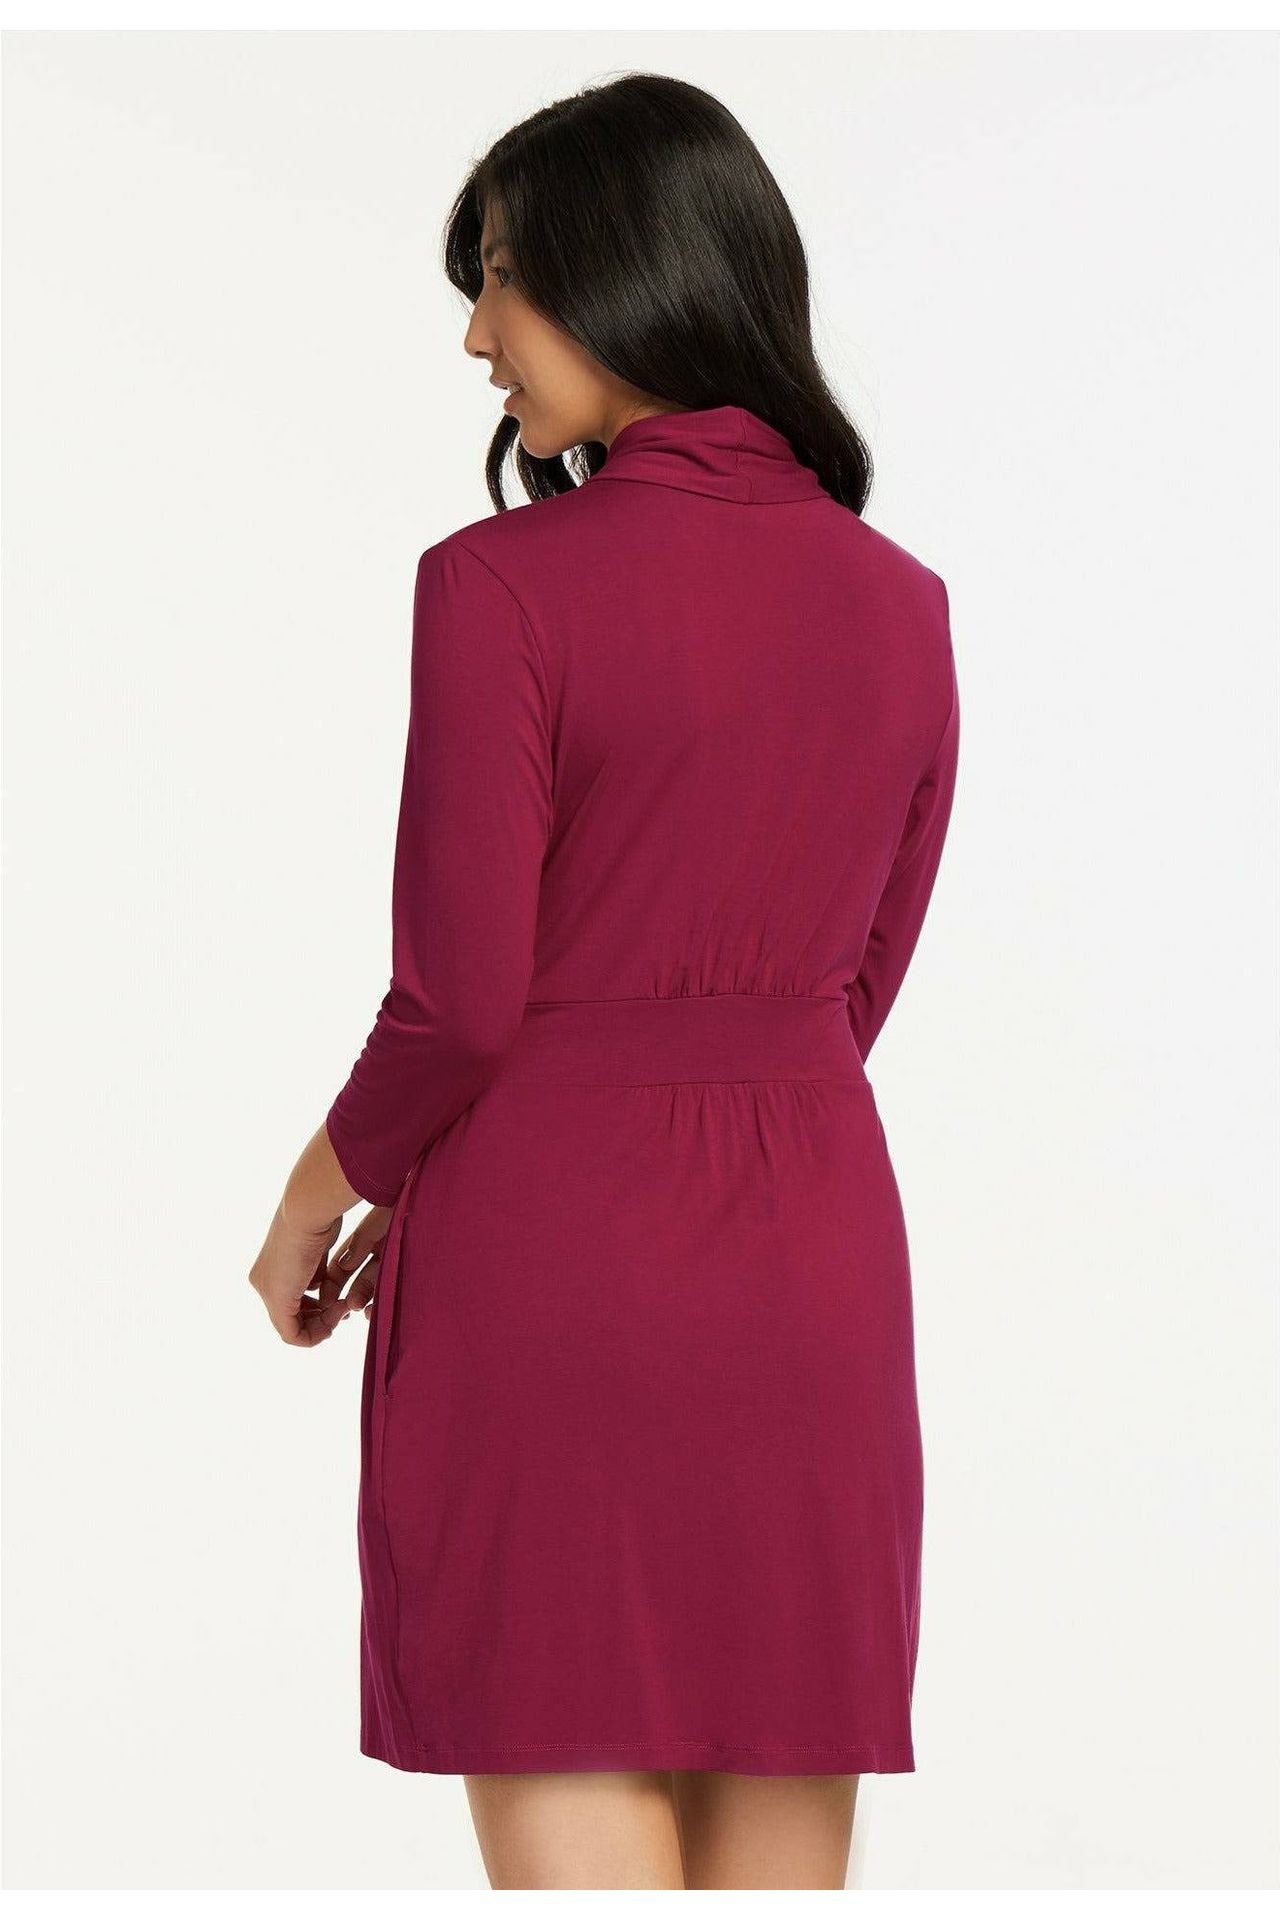 Fleur't Iconic Robe with Silk Ties - Style 620, back, sangria